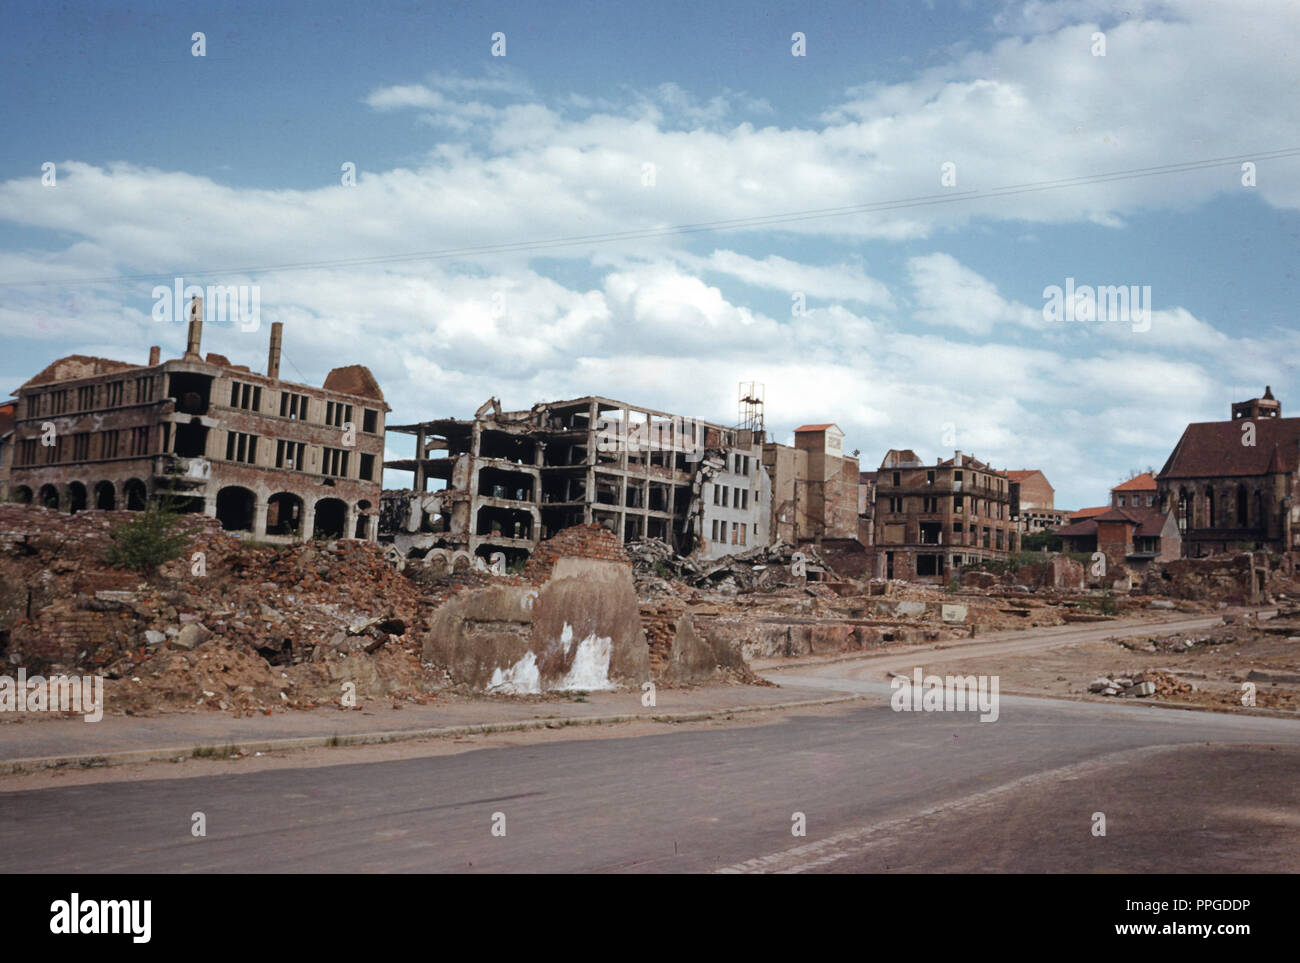 1950's Ruins of a German City Bombed in WW2, Germany Stock Photo